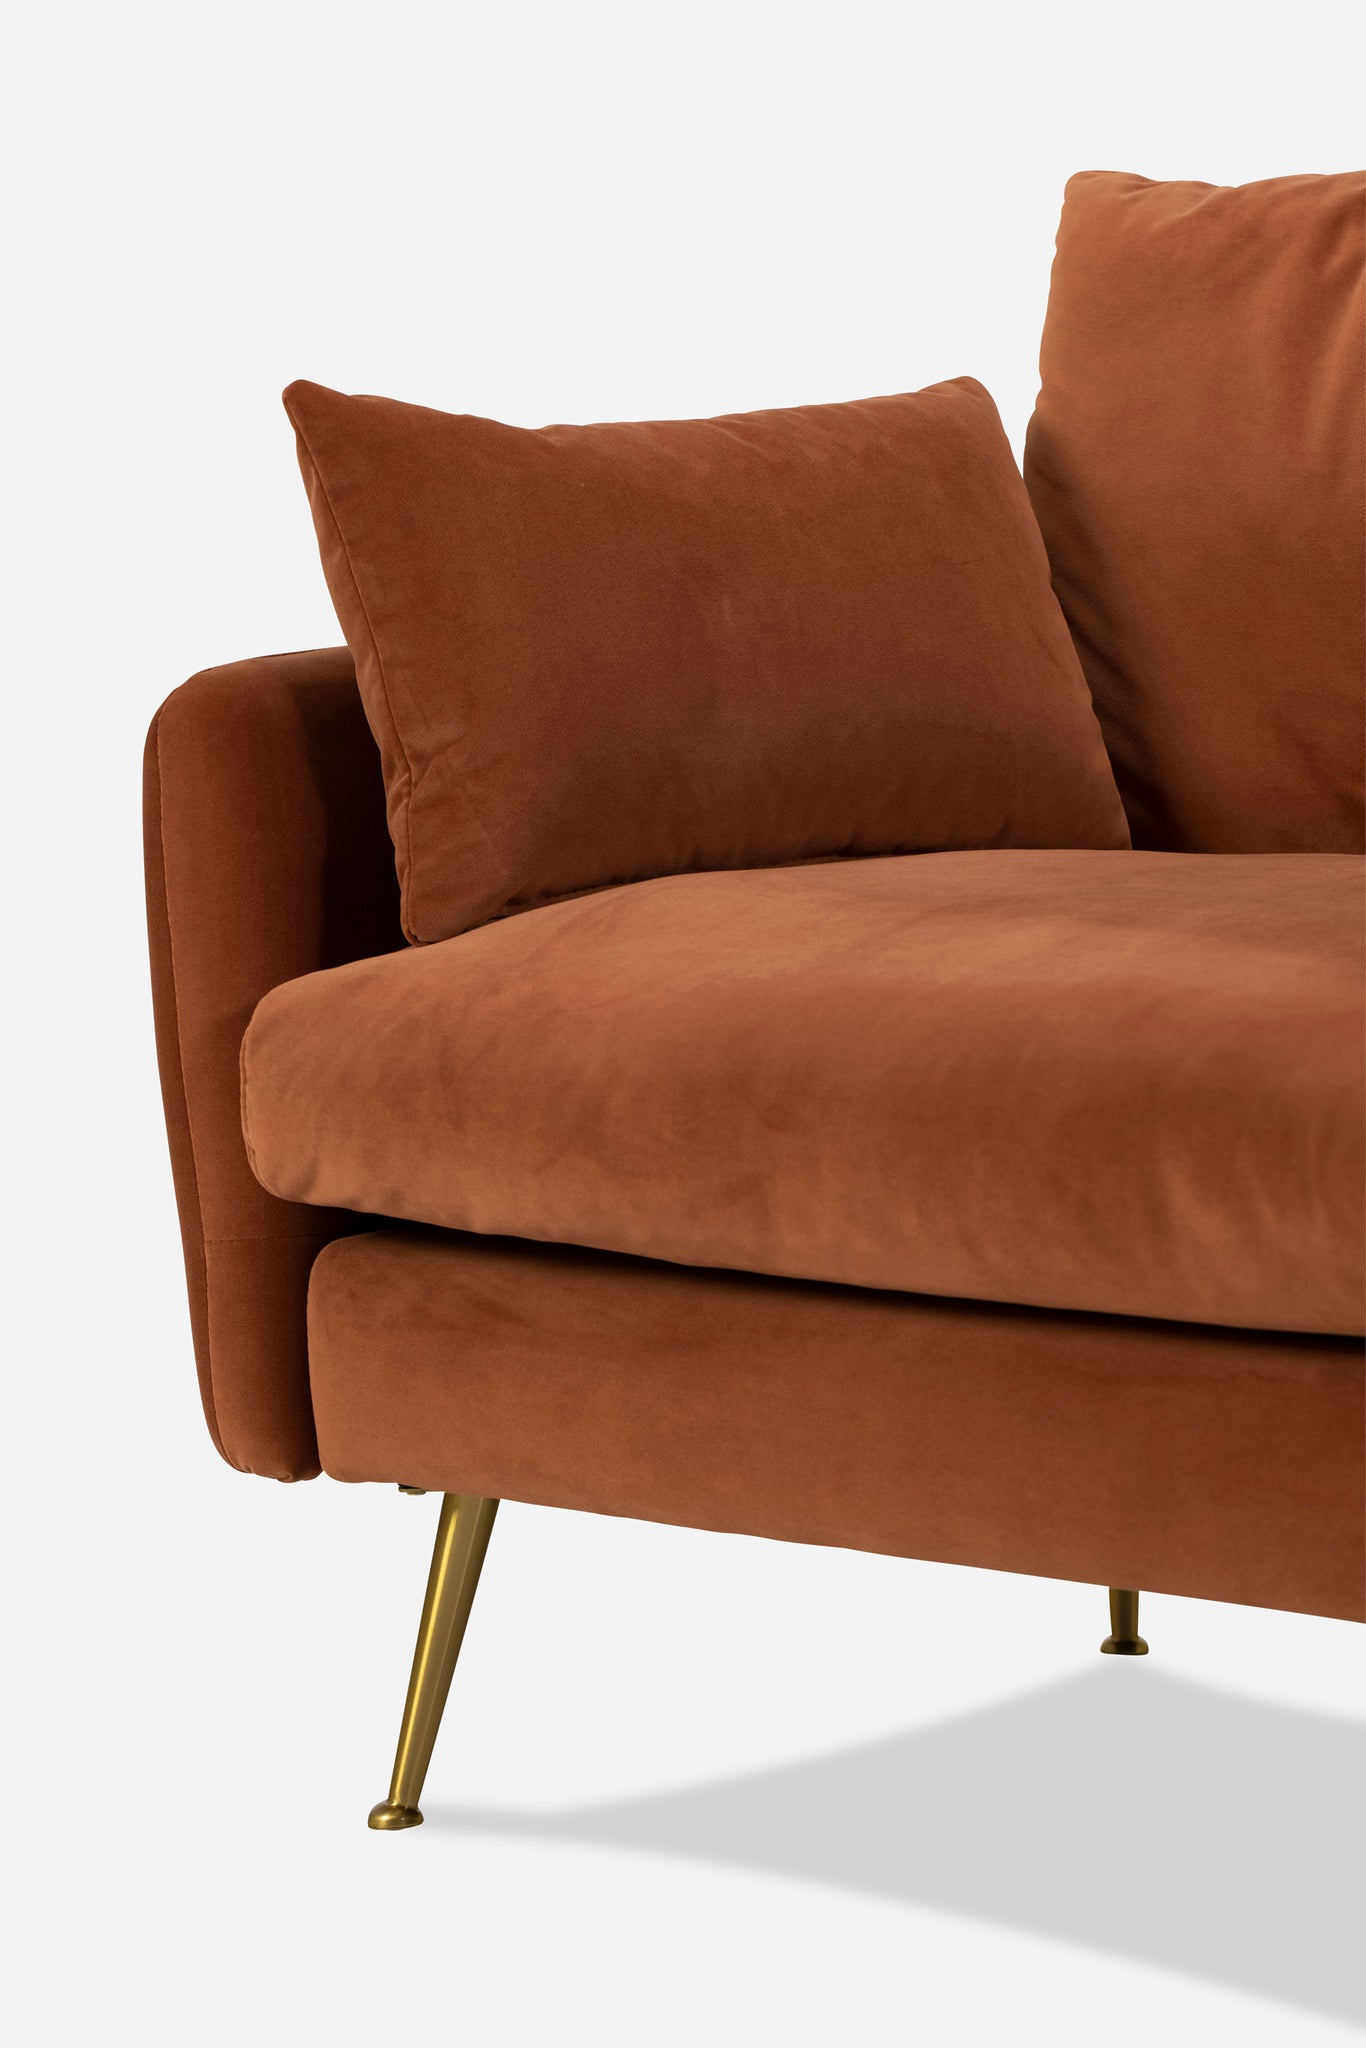 park sectional sofa shown in rust velvet with gold legs left facing right facing